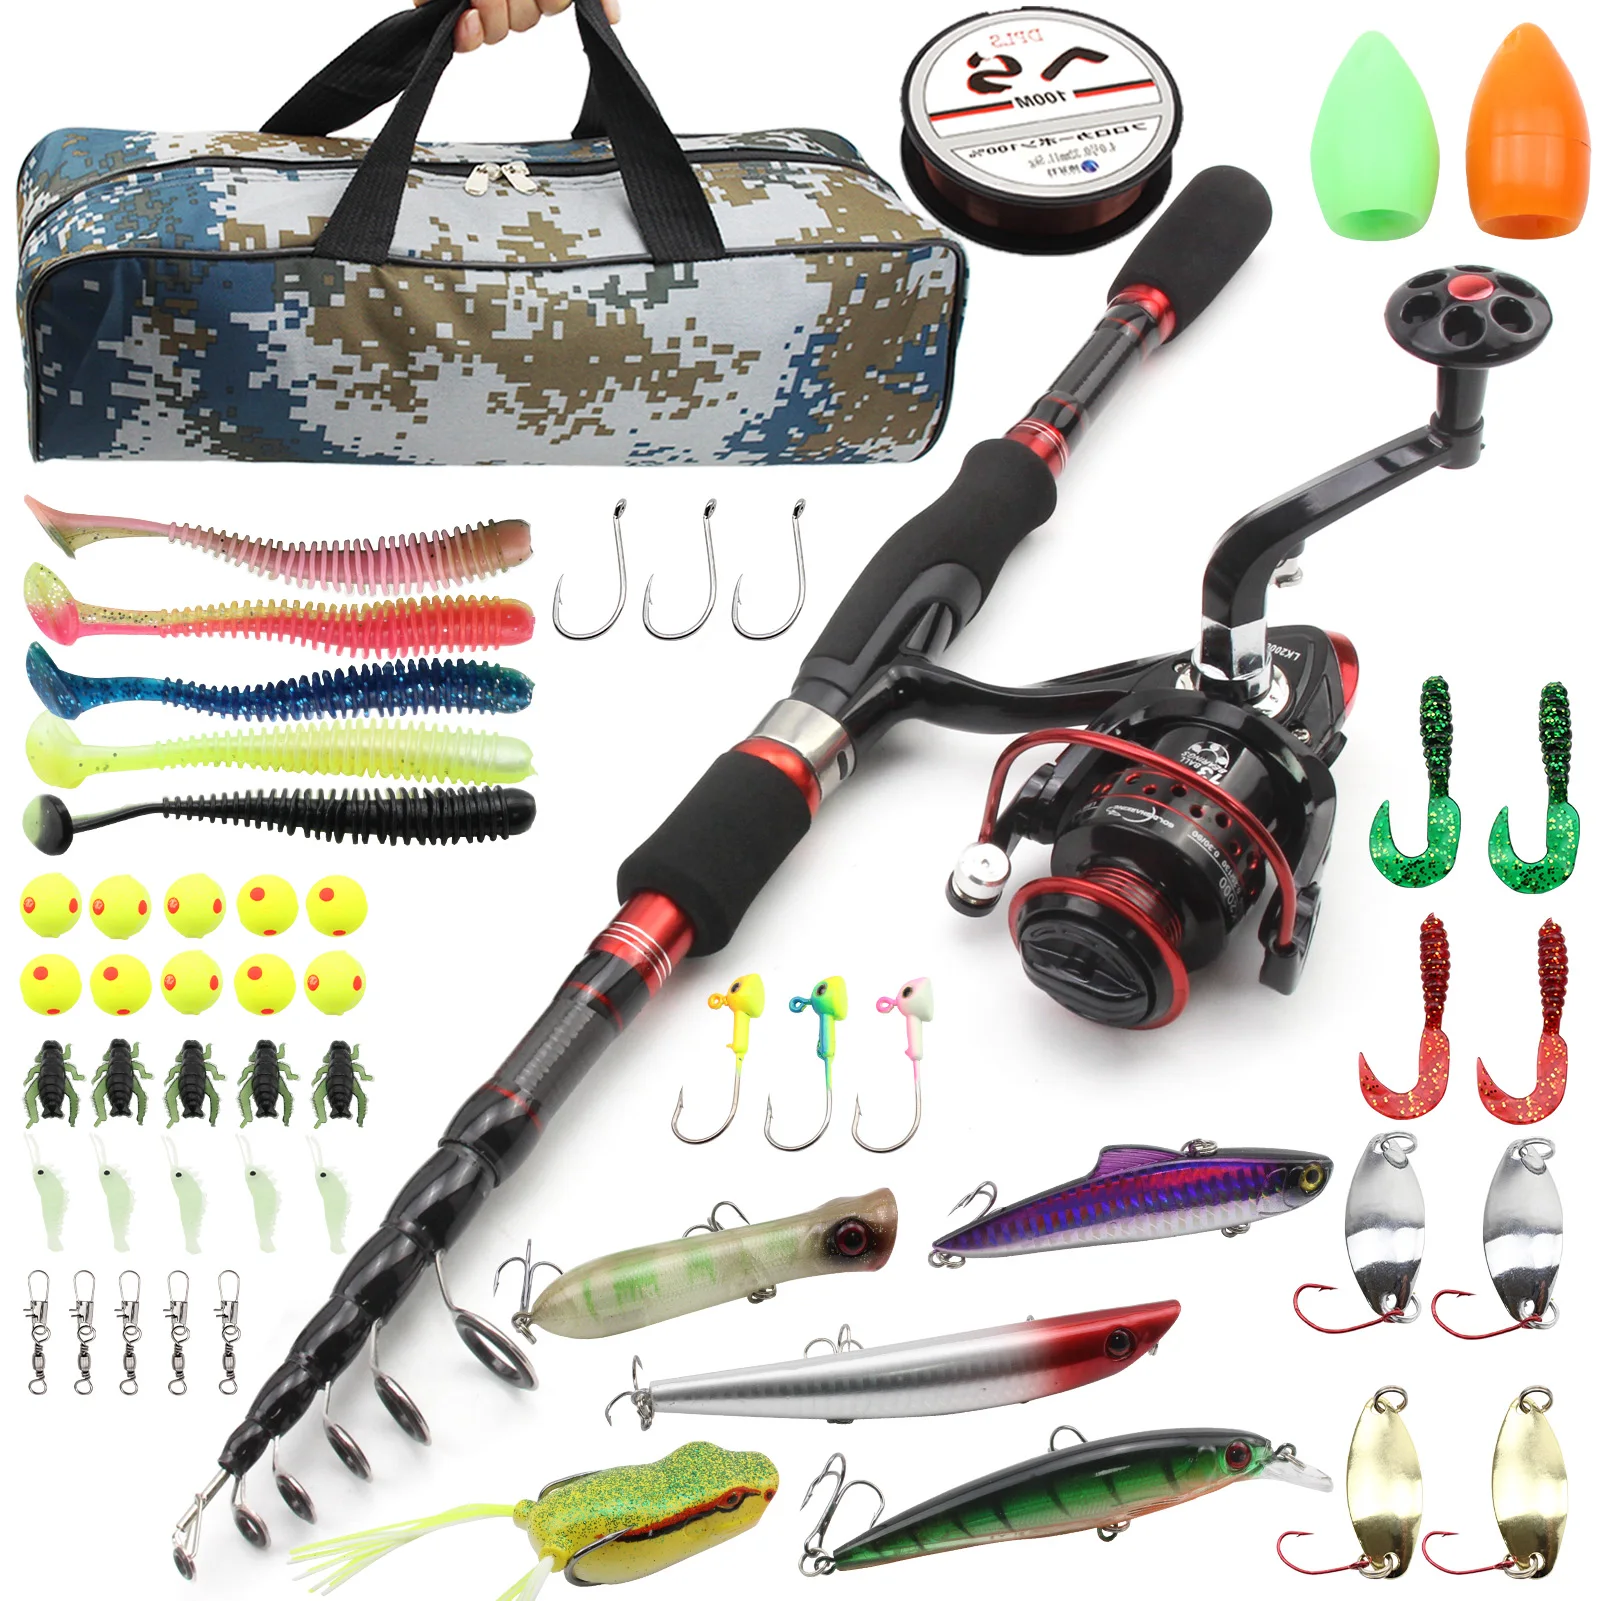 https://ae01.alicdn.com/kf/Hac32b513a23b489bb573493b2dbf8247I/NEW-1-8M-2-1M-telescopic-Carbon-Spinning-fishing-rod-and-Reels-Lures-Hooks-Bag-set.jpg